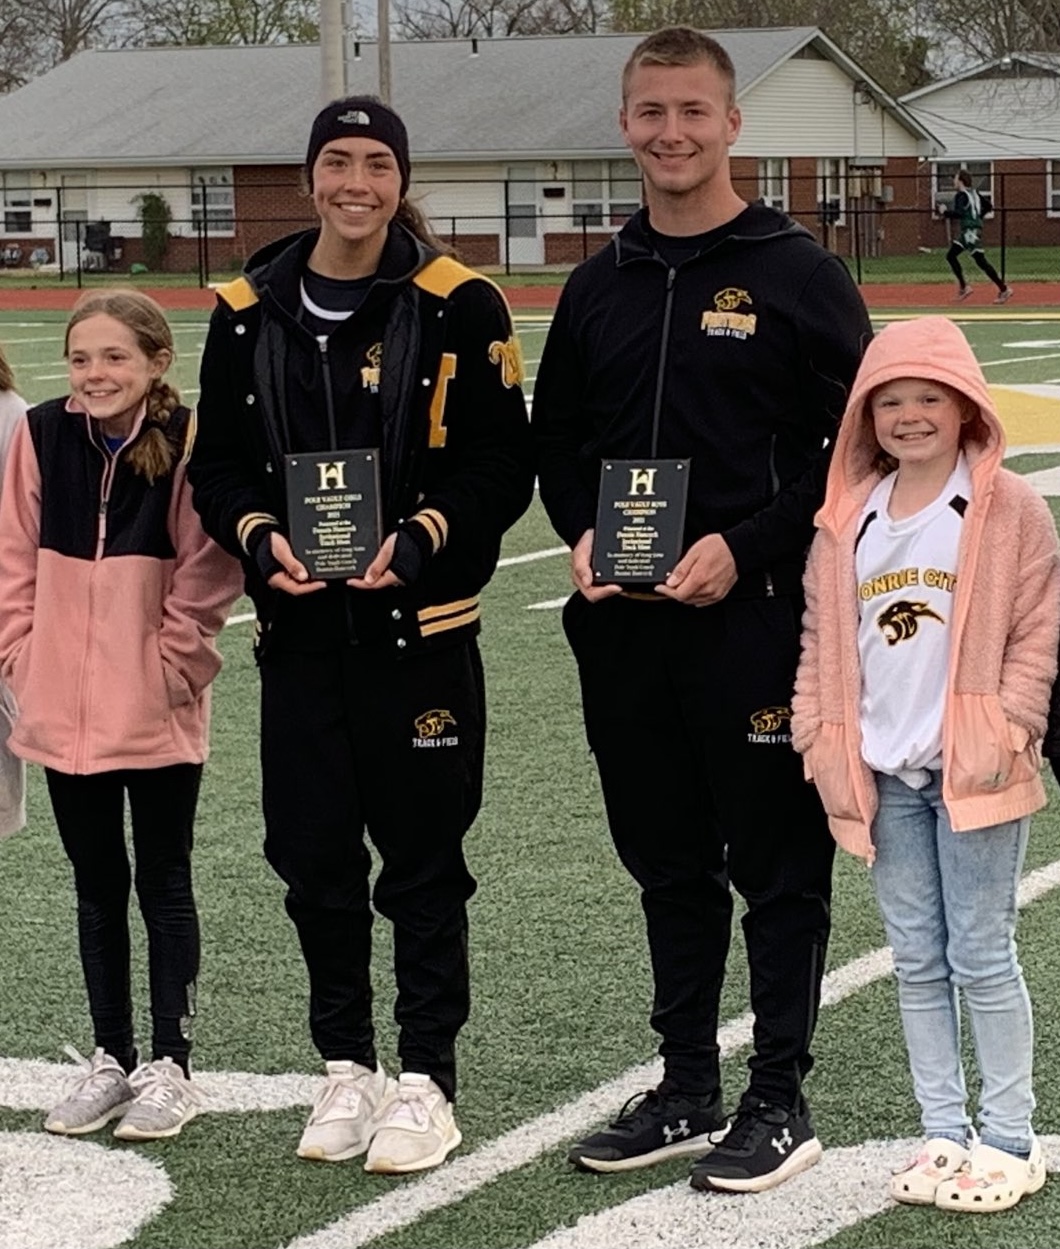 Panthers claim honors at own track invitational